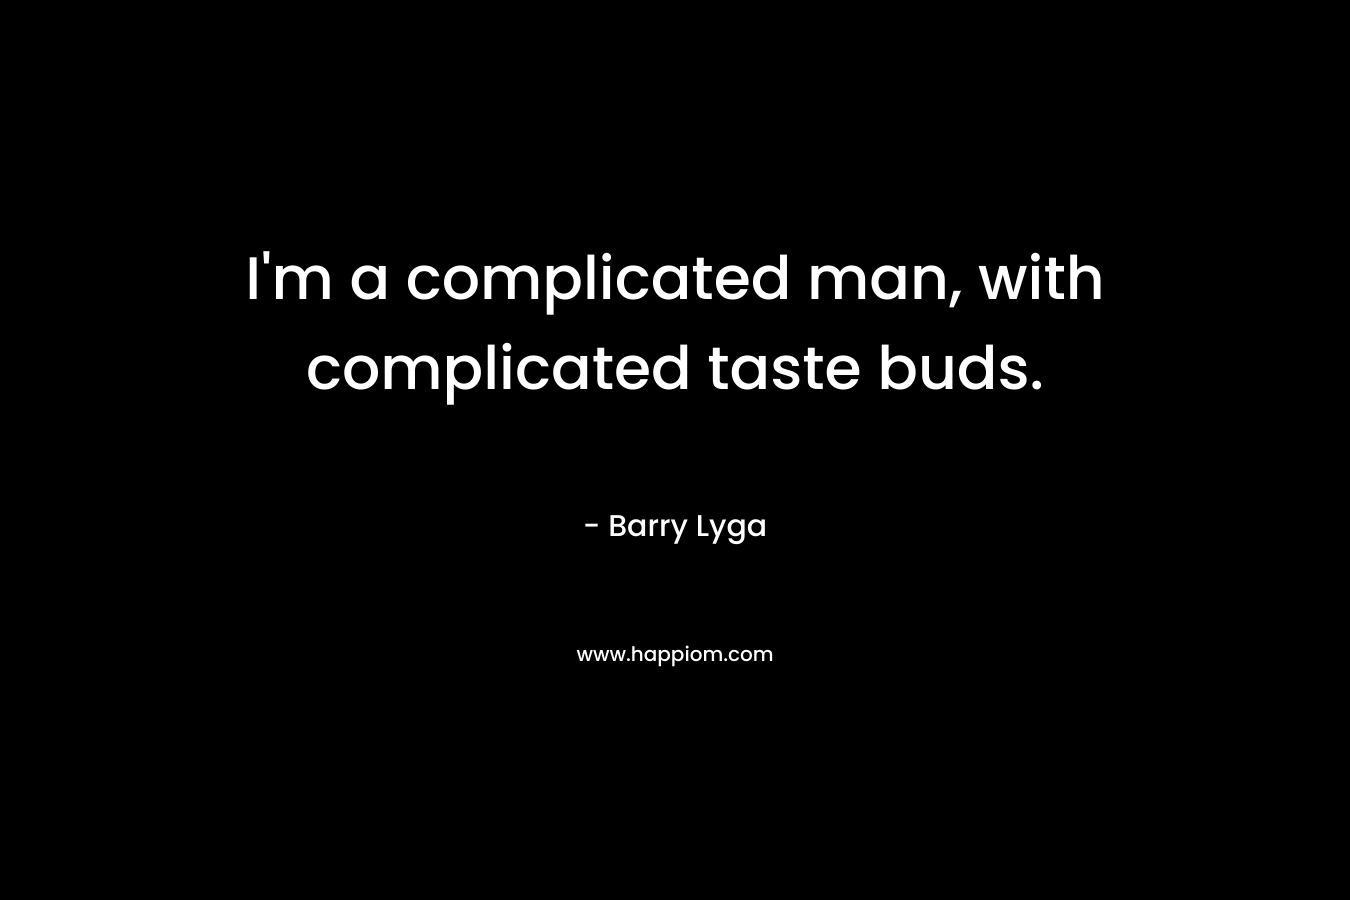 I’m a complicated man, with complicated taste buds. – Barry Lyga